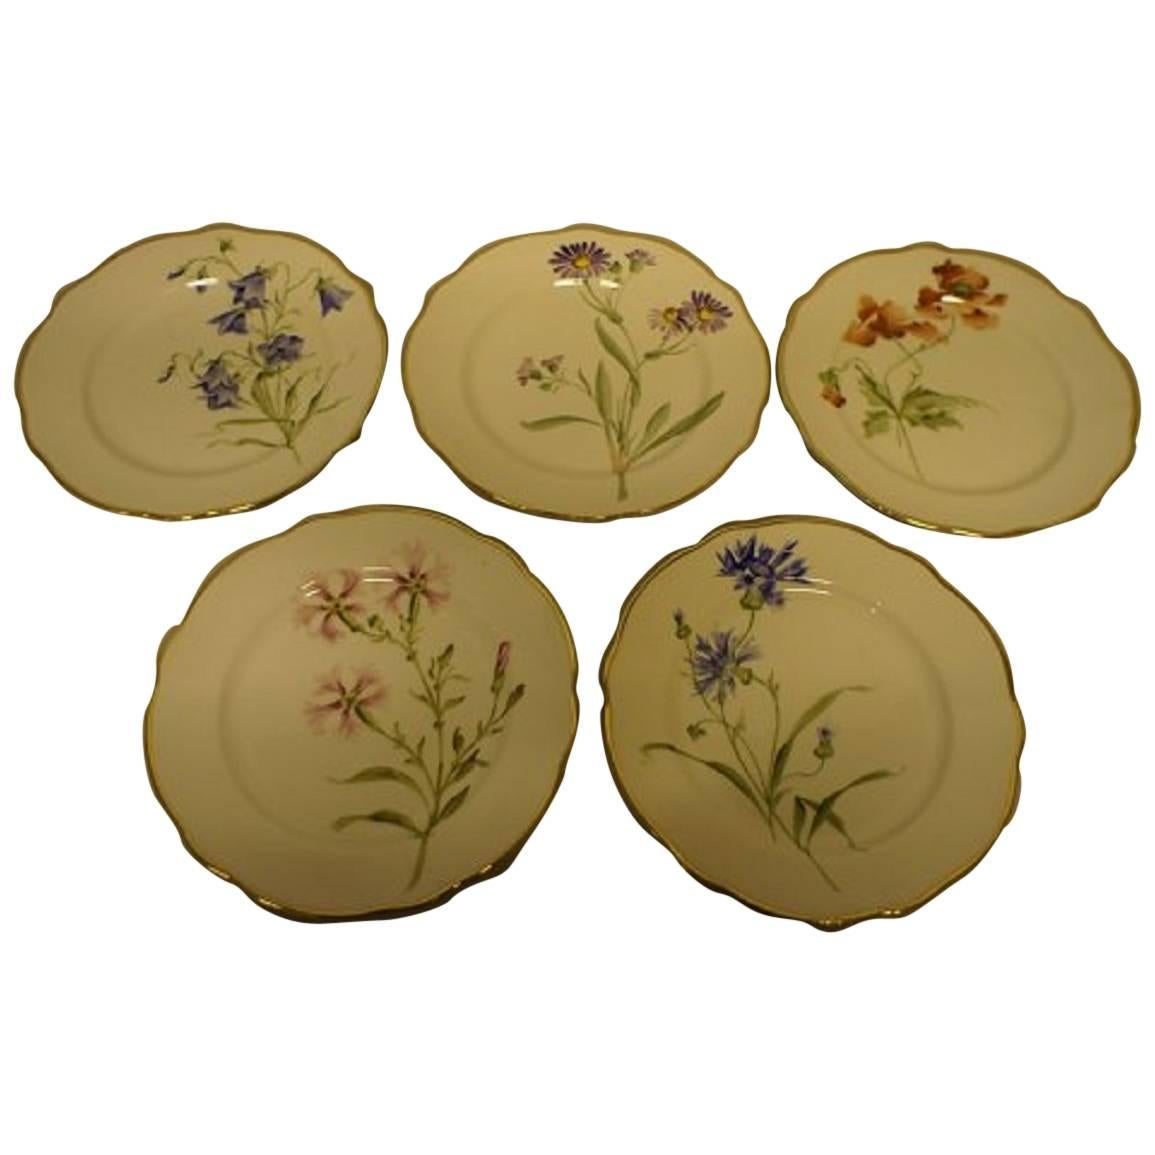 11 Rörstrand Art Nouveau Plates, Hand-Painted, Different Flowers For Sale